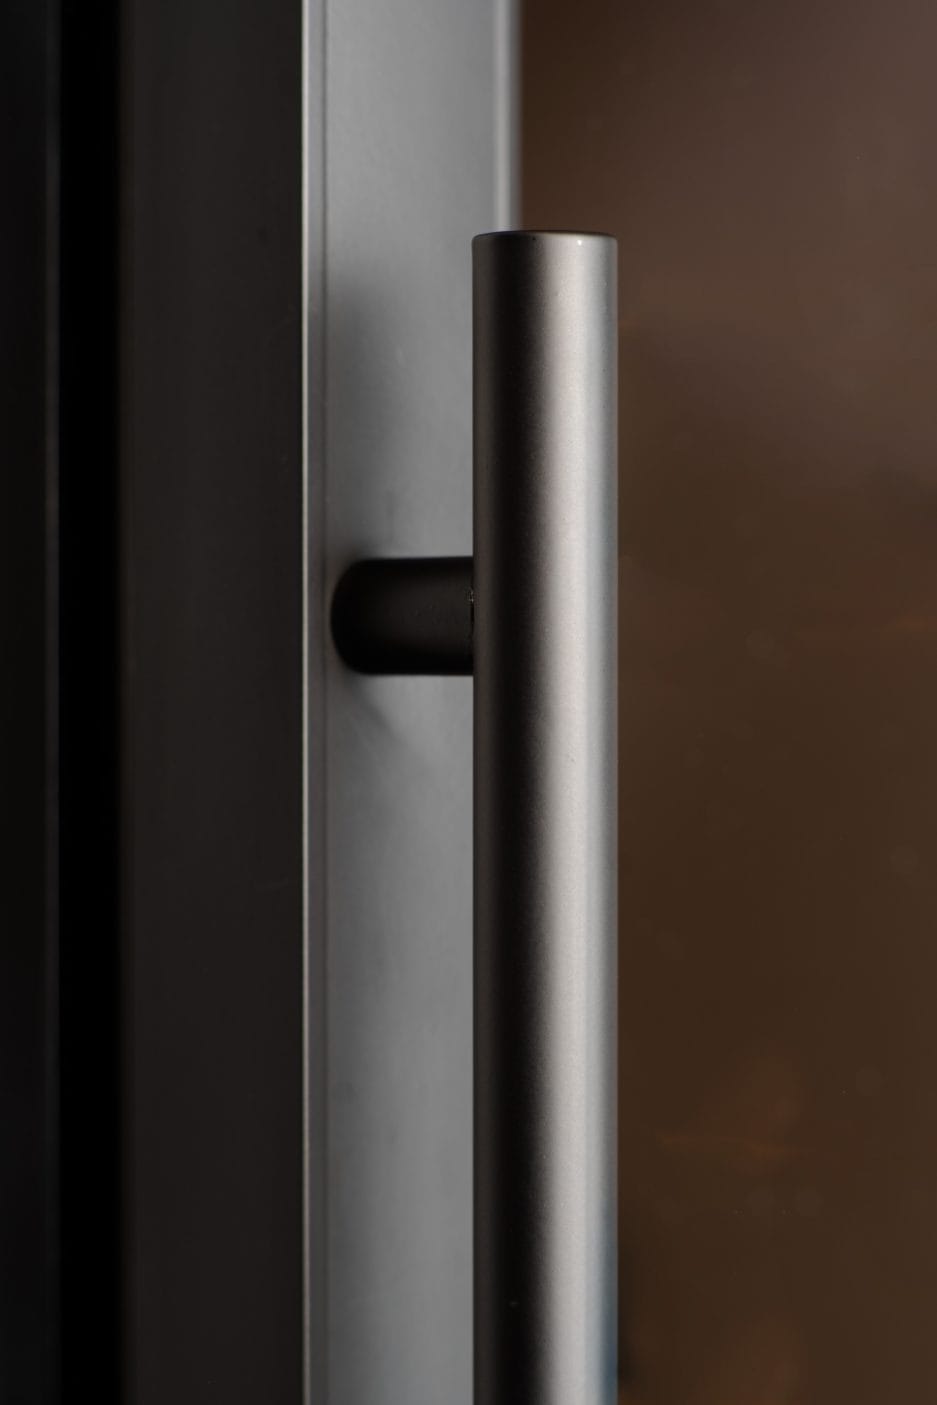 Close-up of a Beer climate cabinet (190 litres, height 124cm, multi-zone) on a dark glass door, highlighting the sleek, cylindrical design and matte finish.